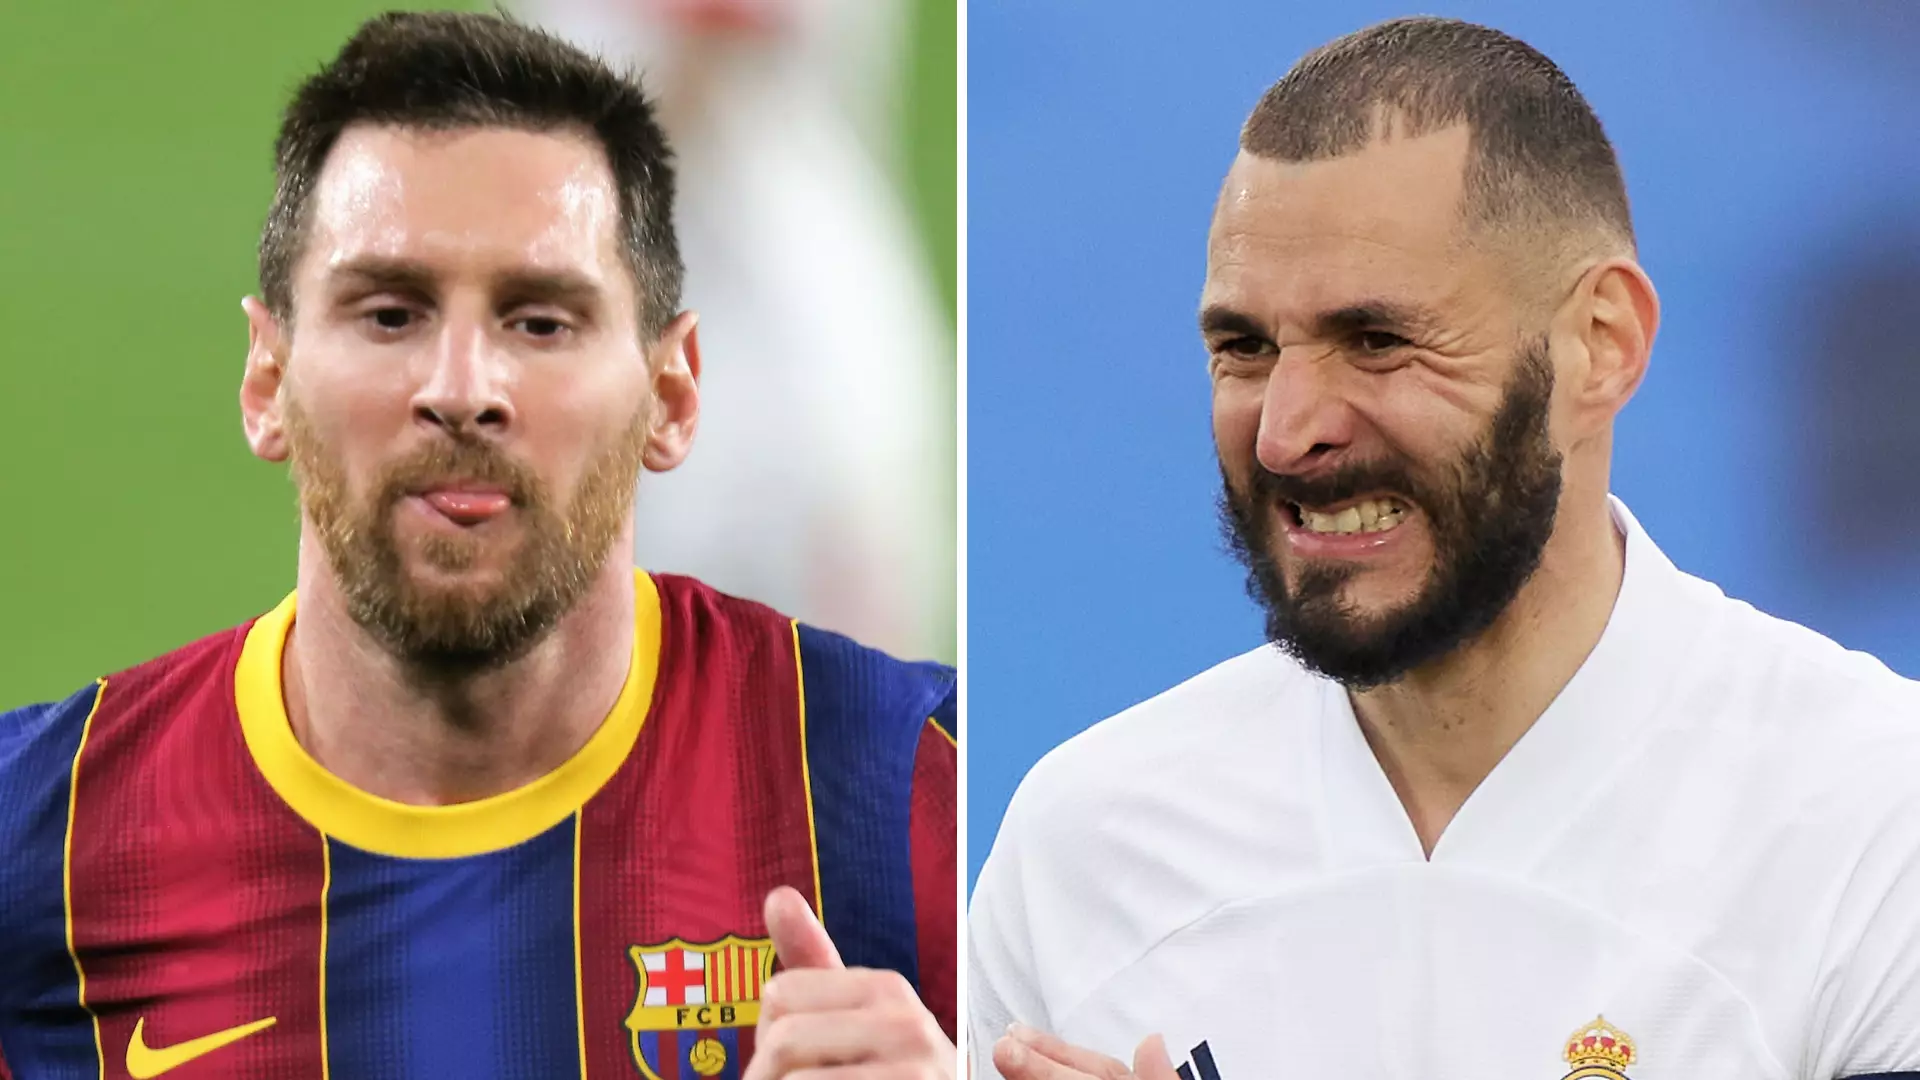 Karim Benzema's Reaction To Lionel Messi's Bombshell Barcelona Exit Is Priceless